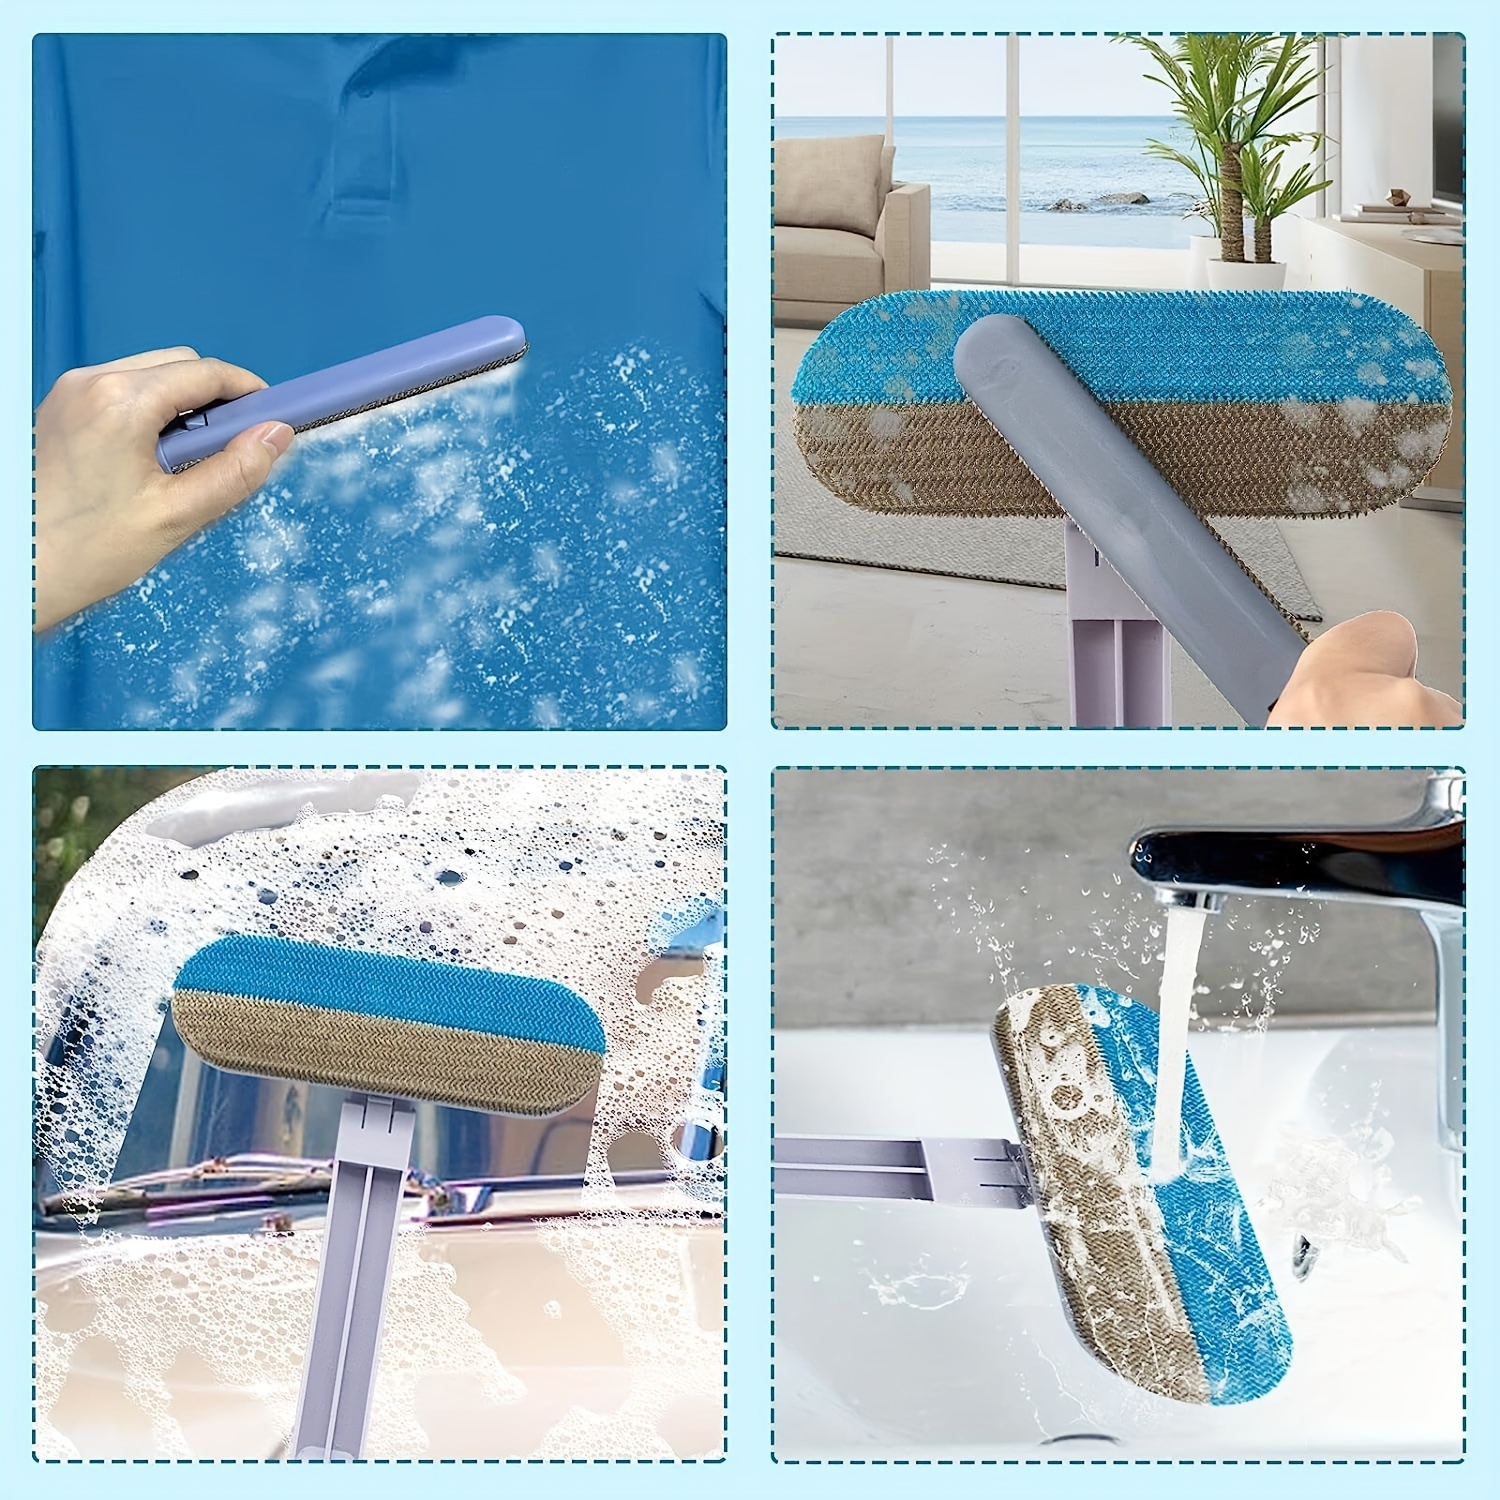 Window Cleaning Supplies, Magic Window Cleaning Brush Tools for